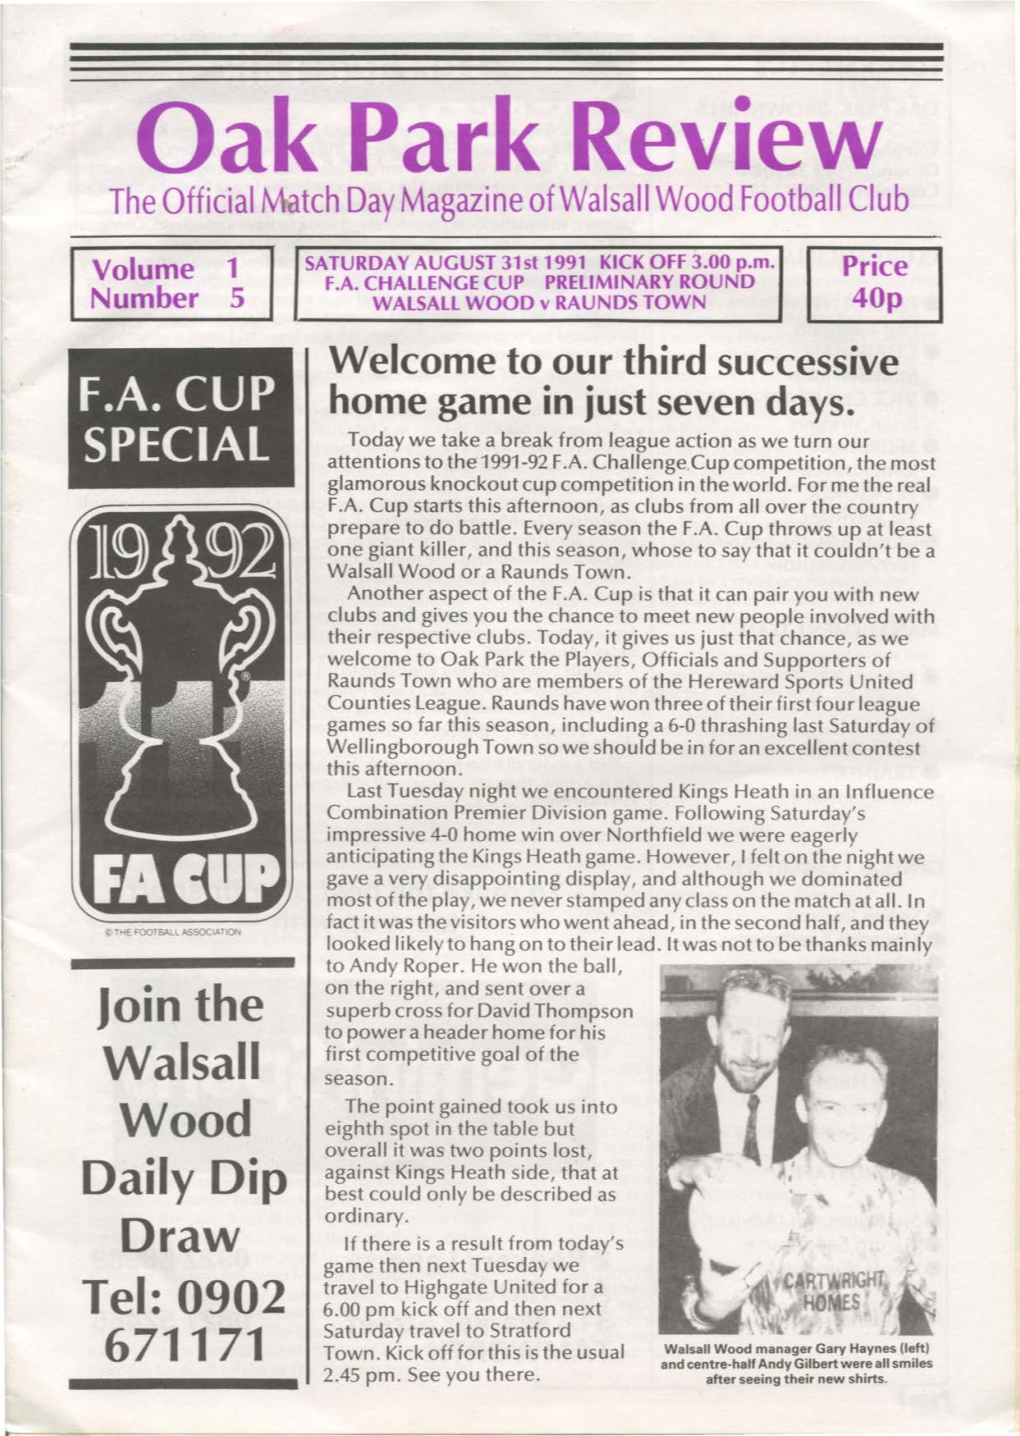 Oak Park Review the Official Match Day Magazine Ofwalsall Wood Football Club